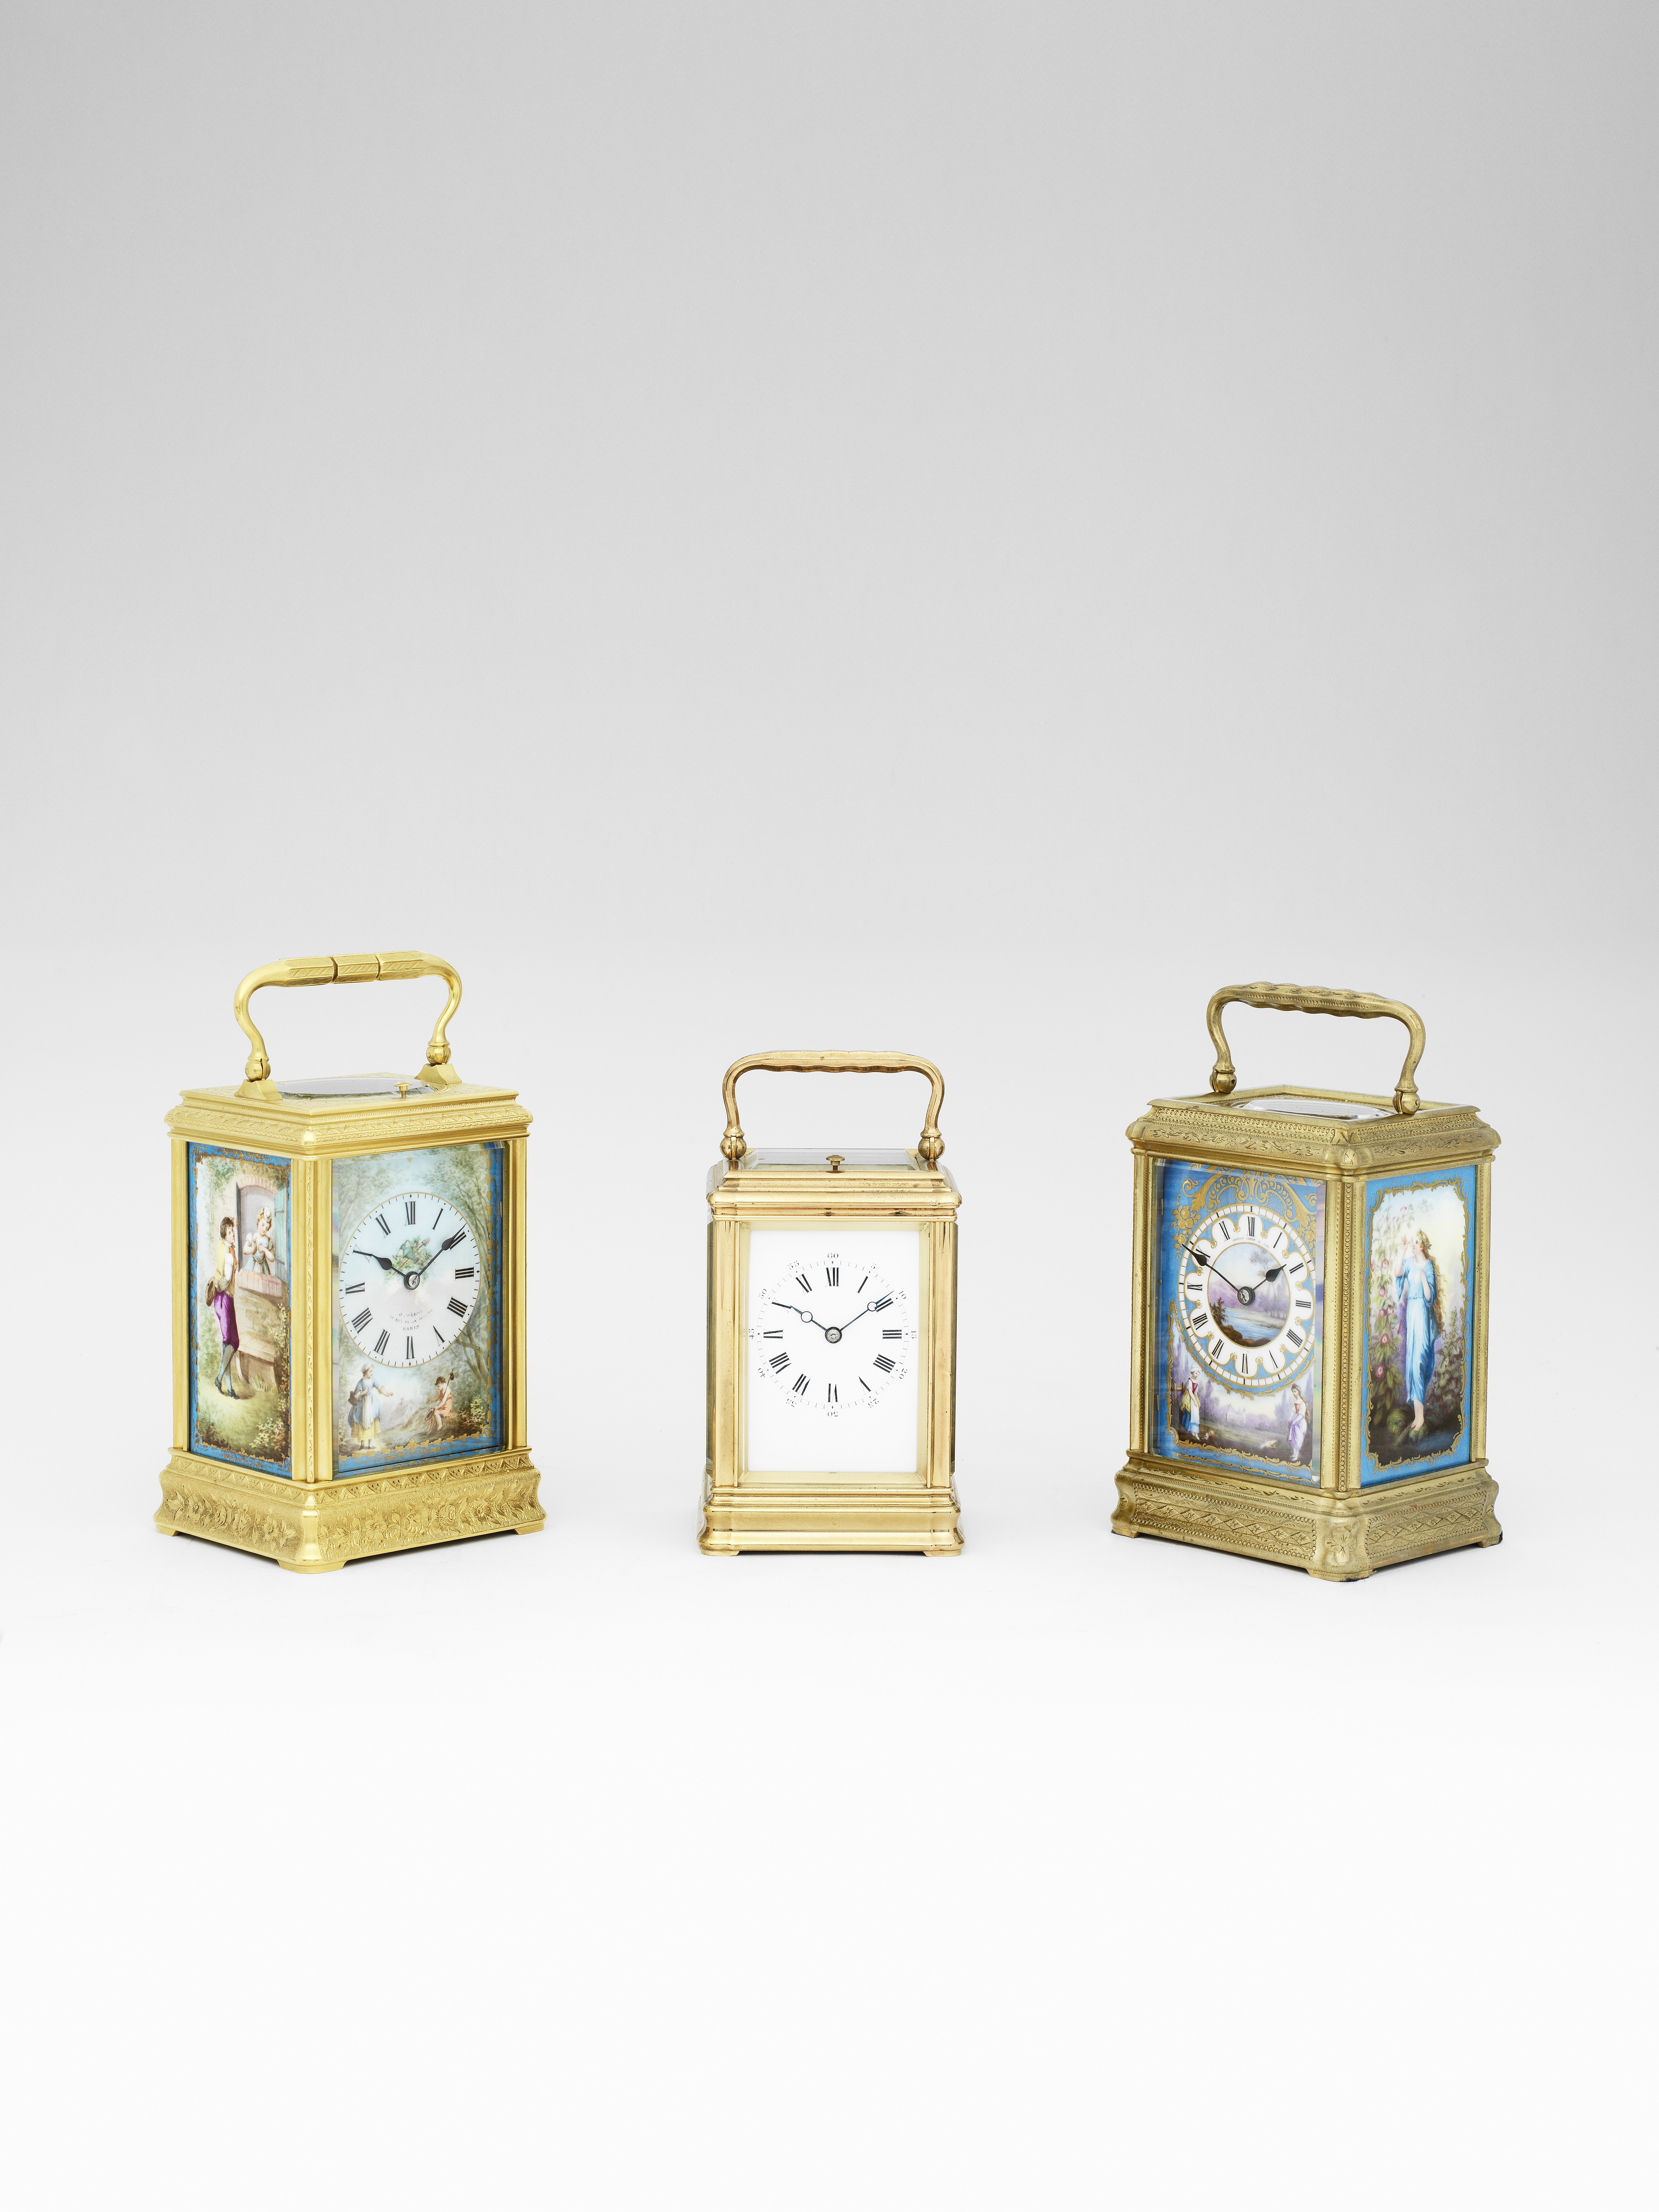 A fine late 19th century French engraved gorge cased enamel panelled carriage clock with original...